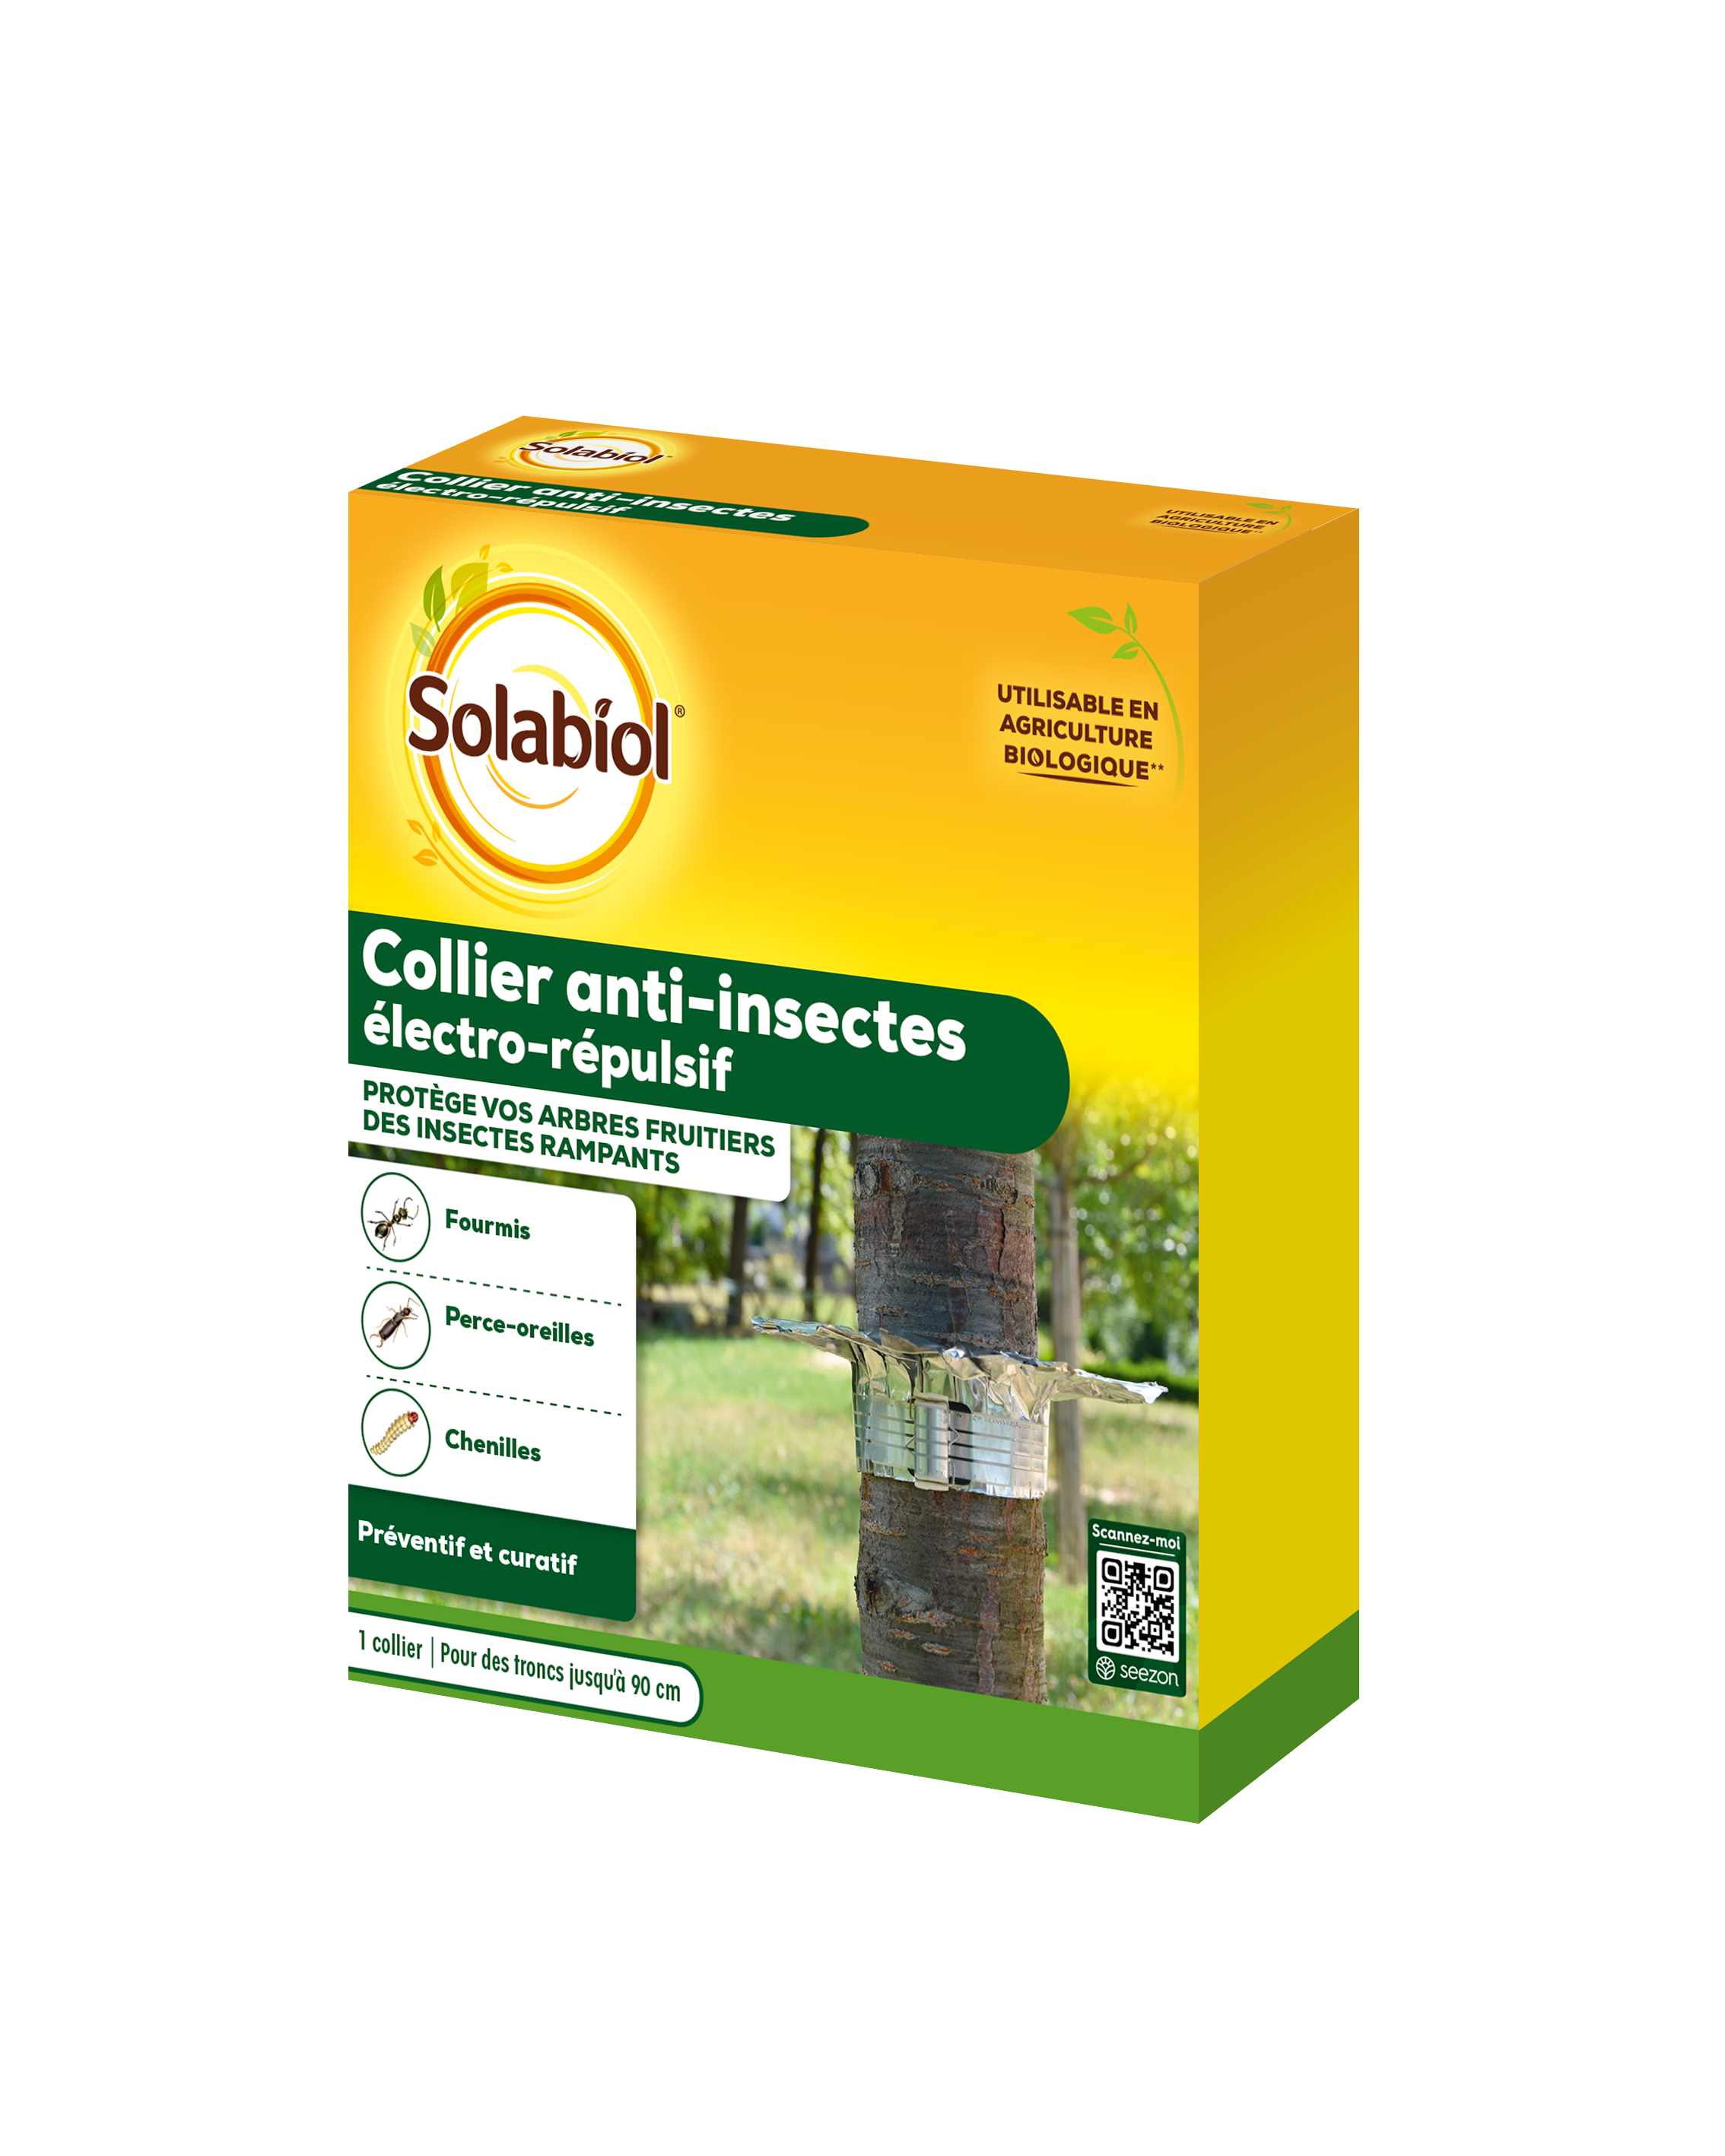 Collier anti-insectes | electro-répulsif | protection arbres fruitiers